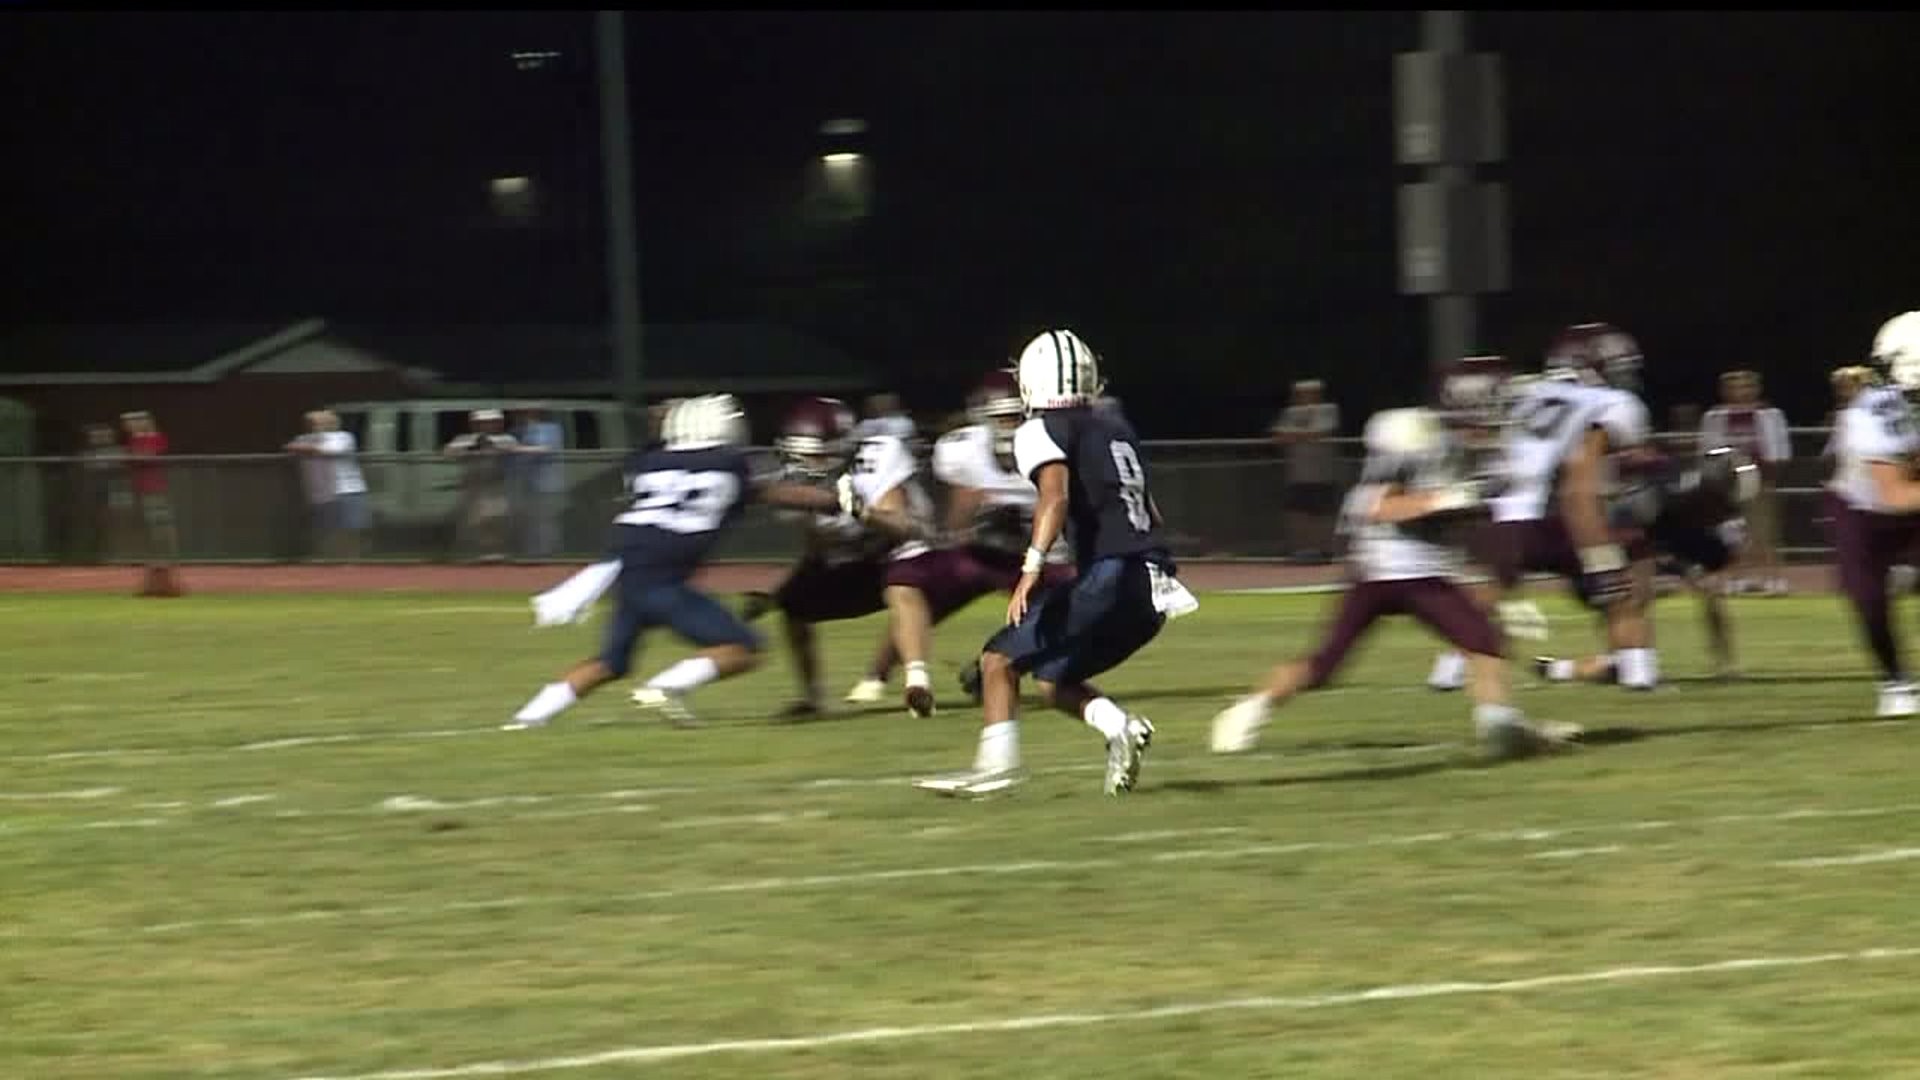 HSFF 2018 week 2 Shippensburg at West York highlights